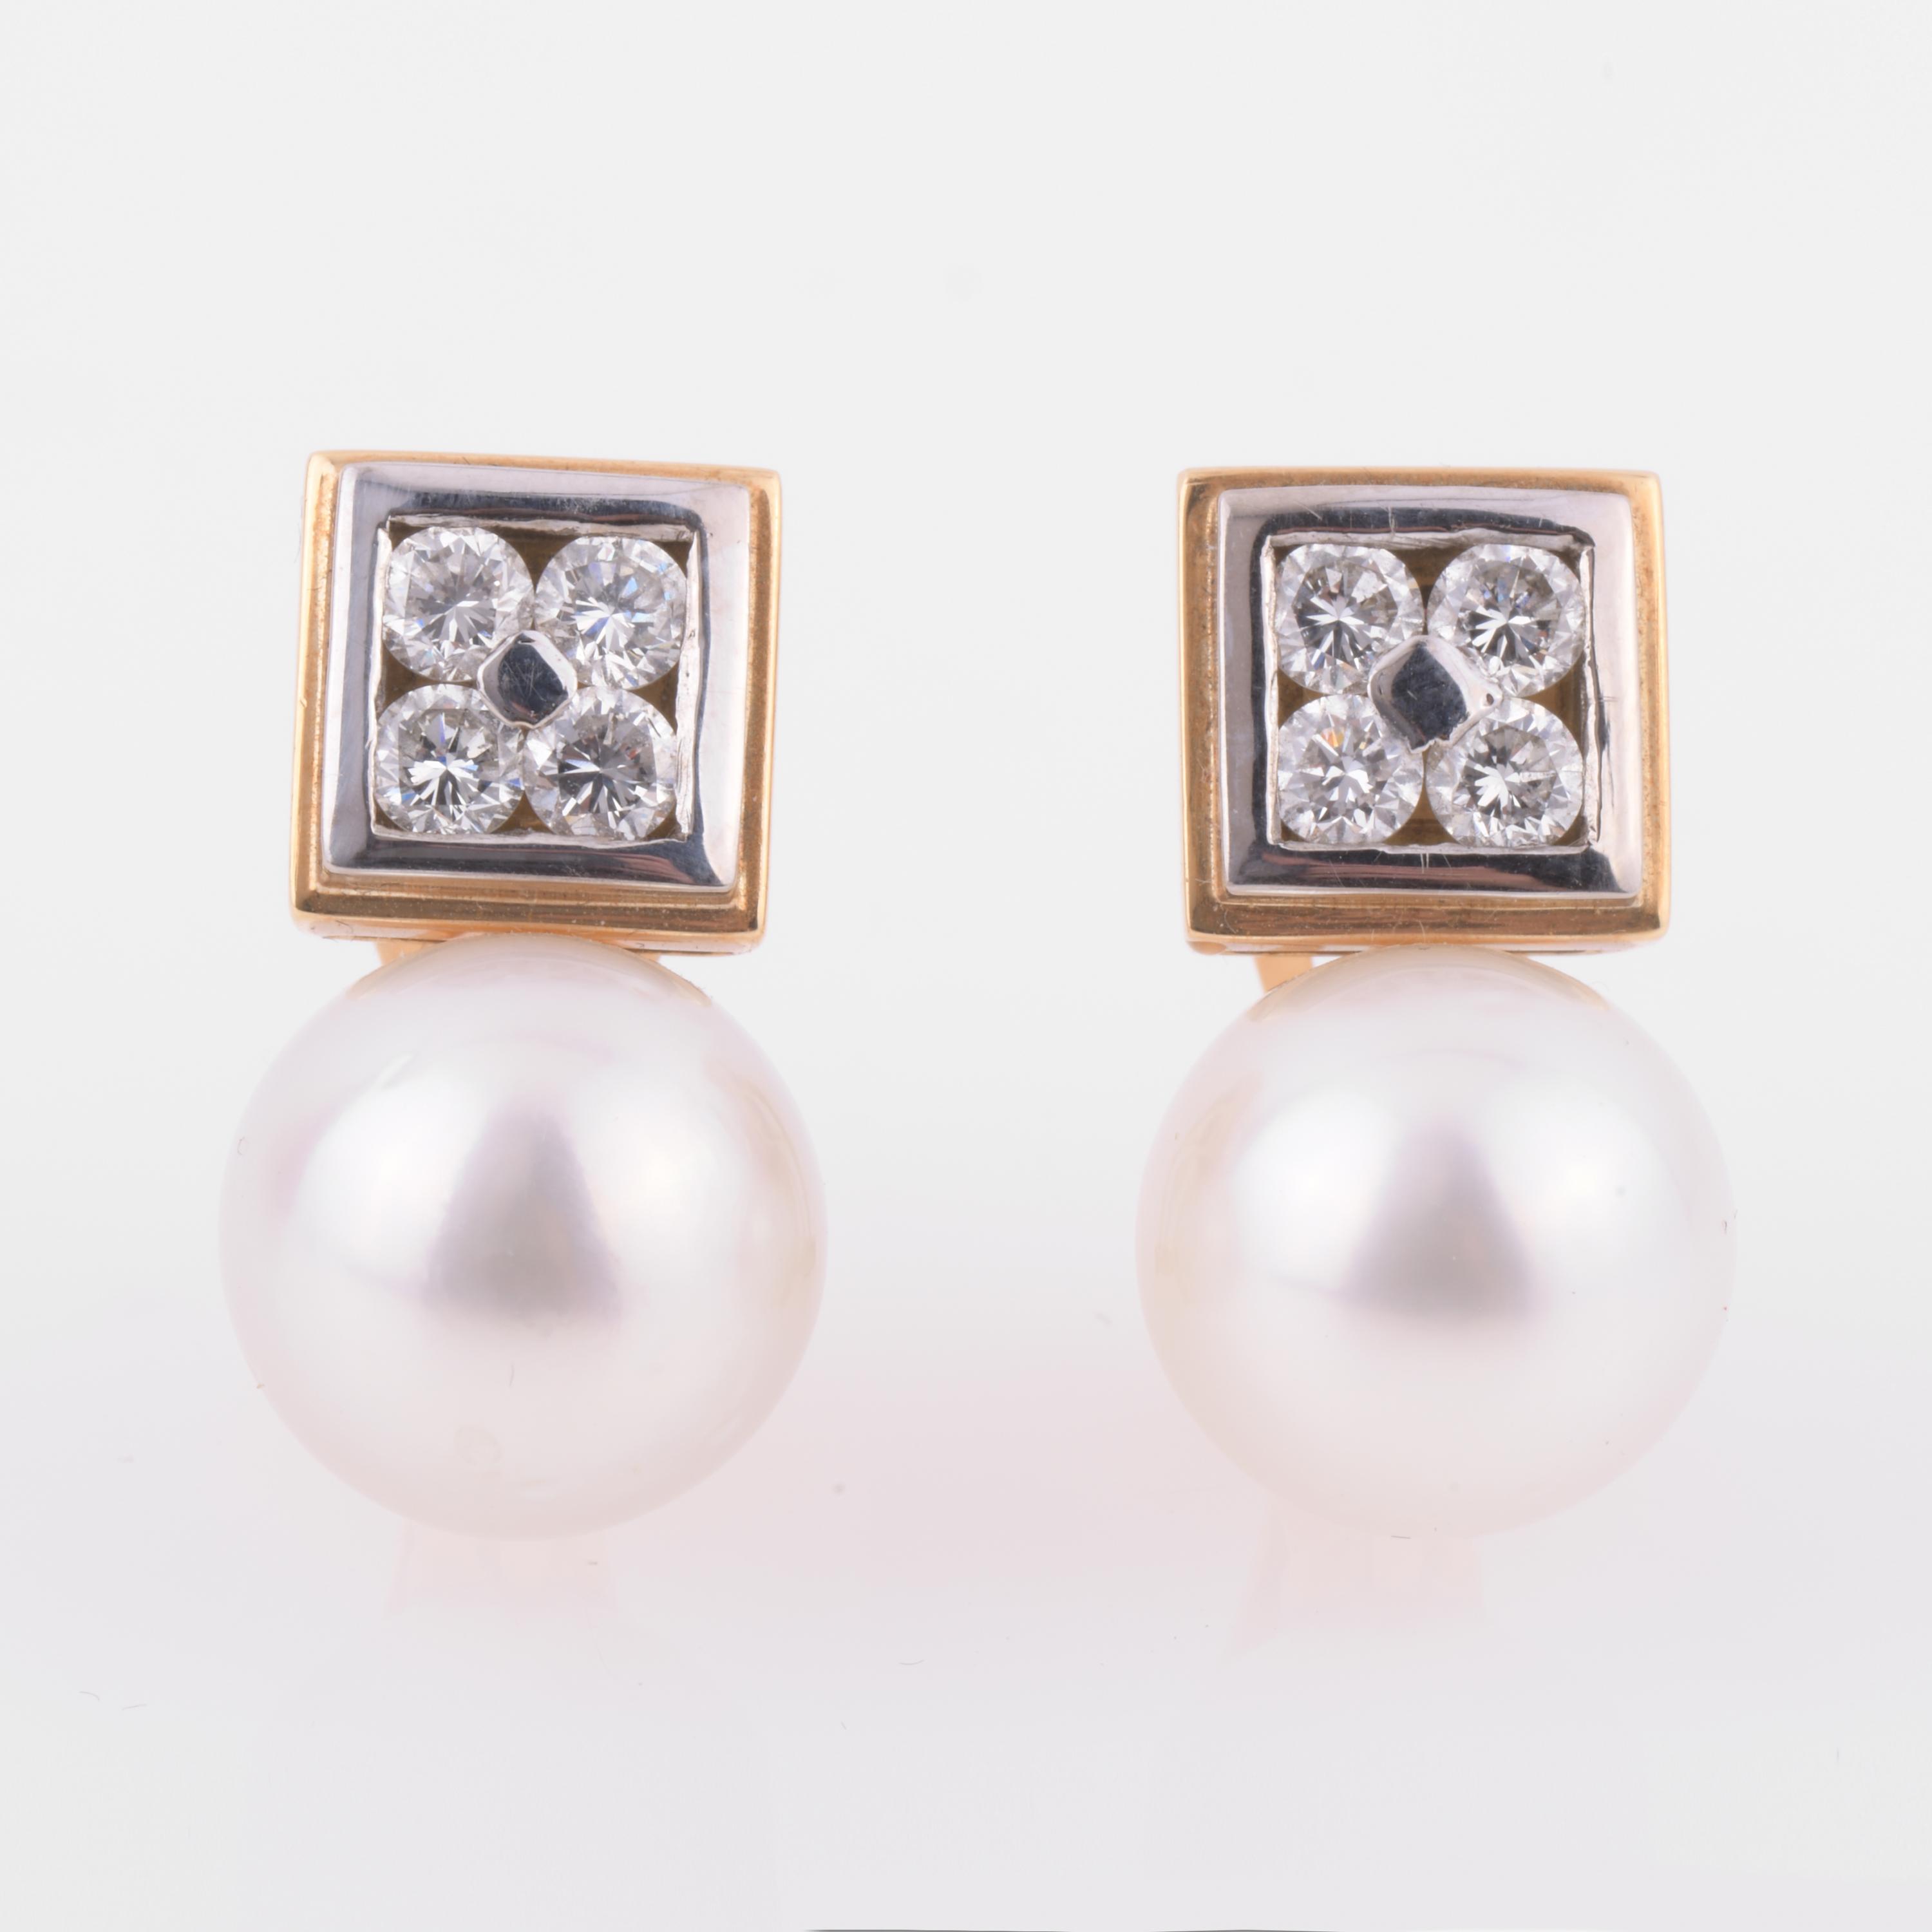 PEARLS AND DIAMONDS YOU AND ME EARRINGS.